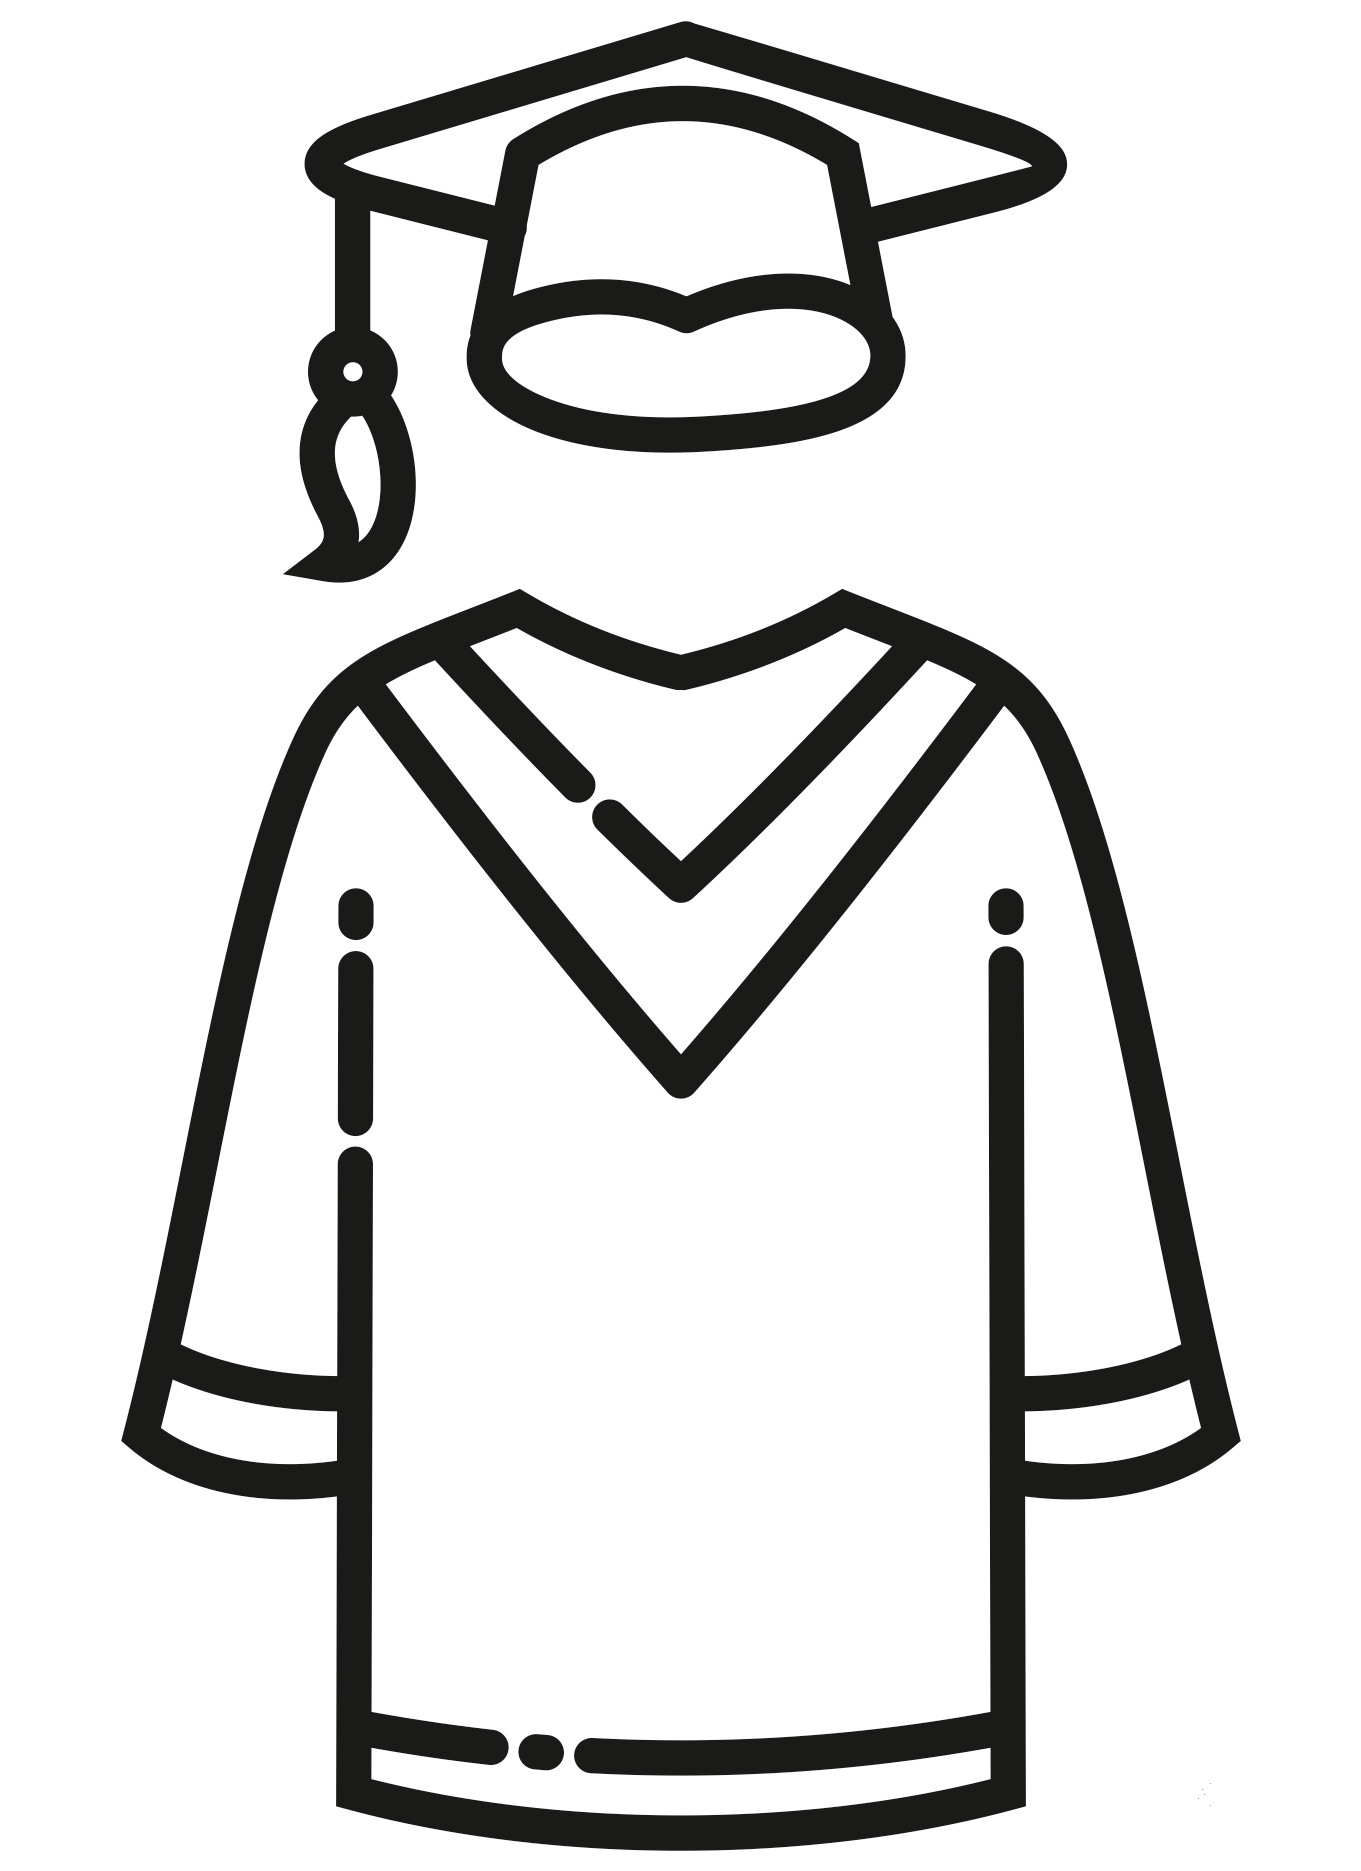 Cap and Gown coloring page - ColouringPages